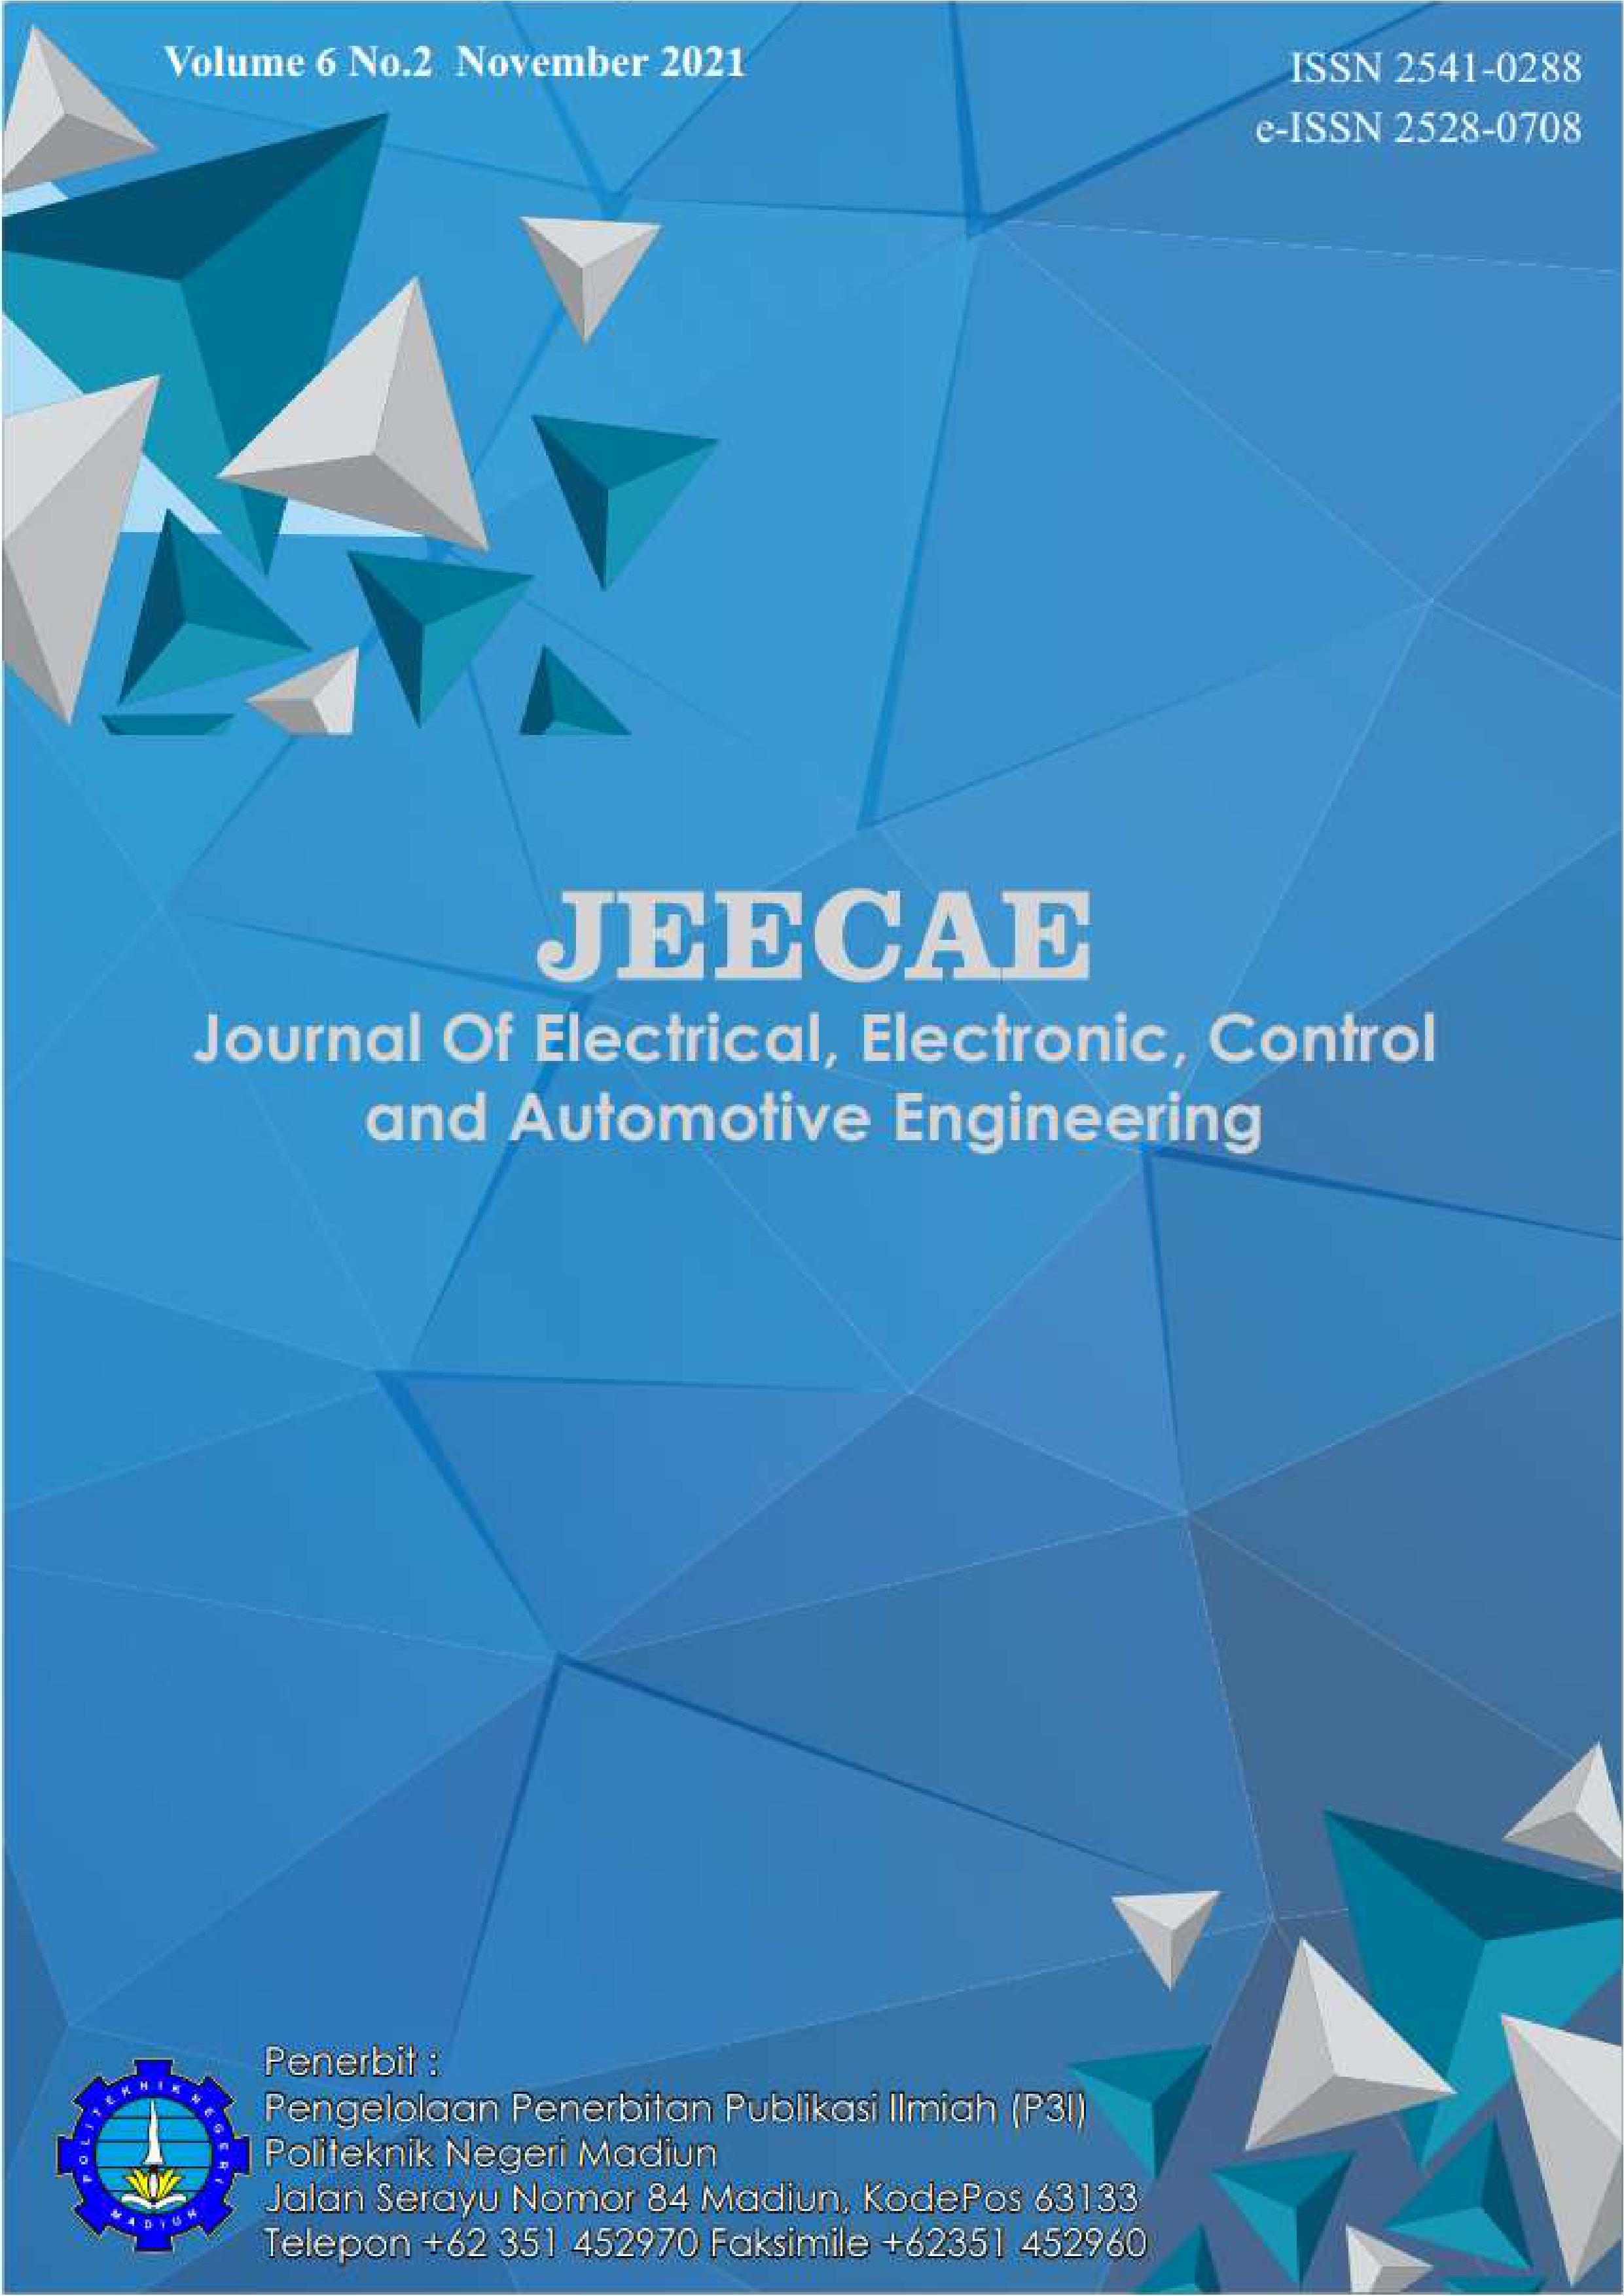 					View Vol. 6 No. 2 (2021): JOURNAL OF ELECTRICAL, ELECTRONICS, CONTROL, AND AUTOMOTIVE ENGINEERING (JEECAE)
				